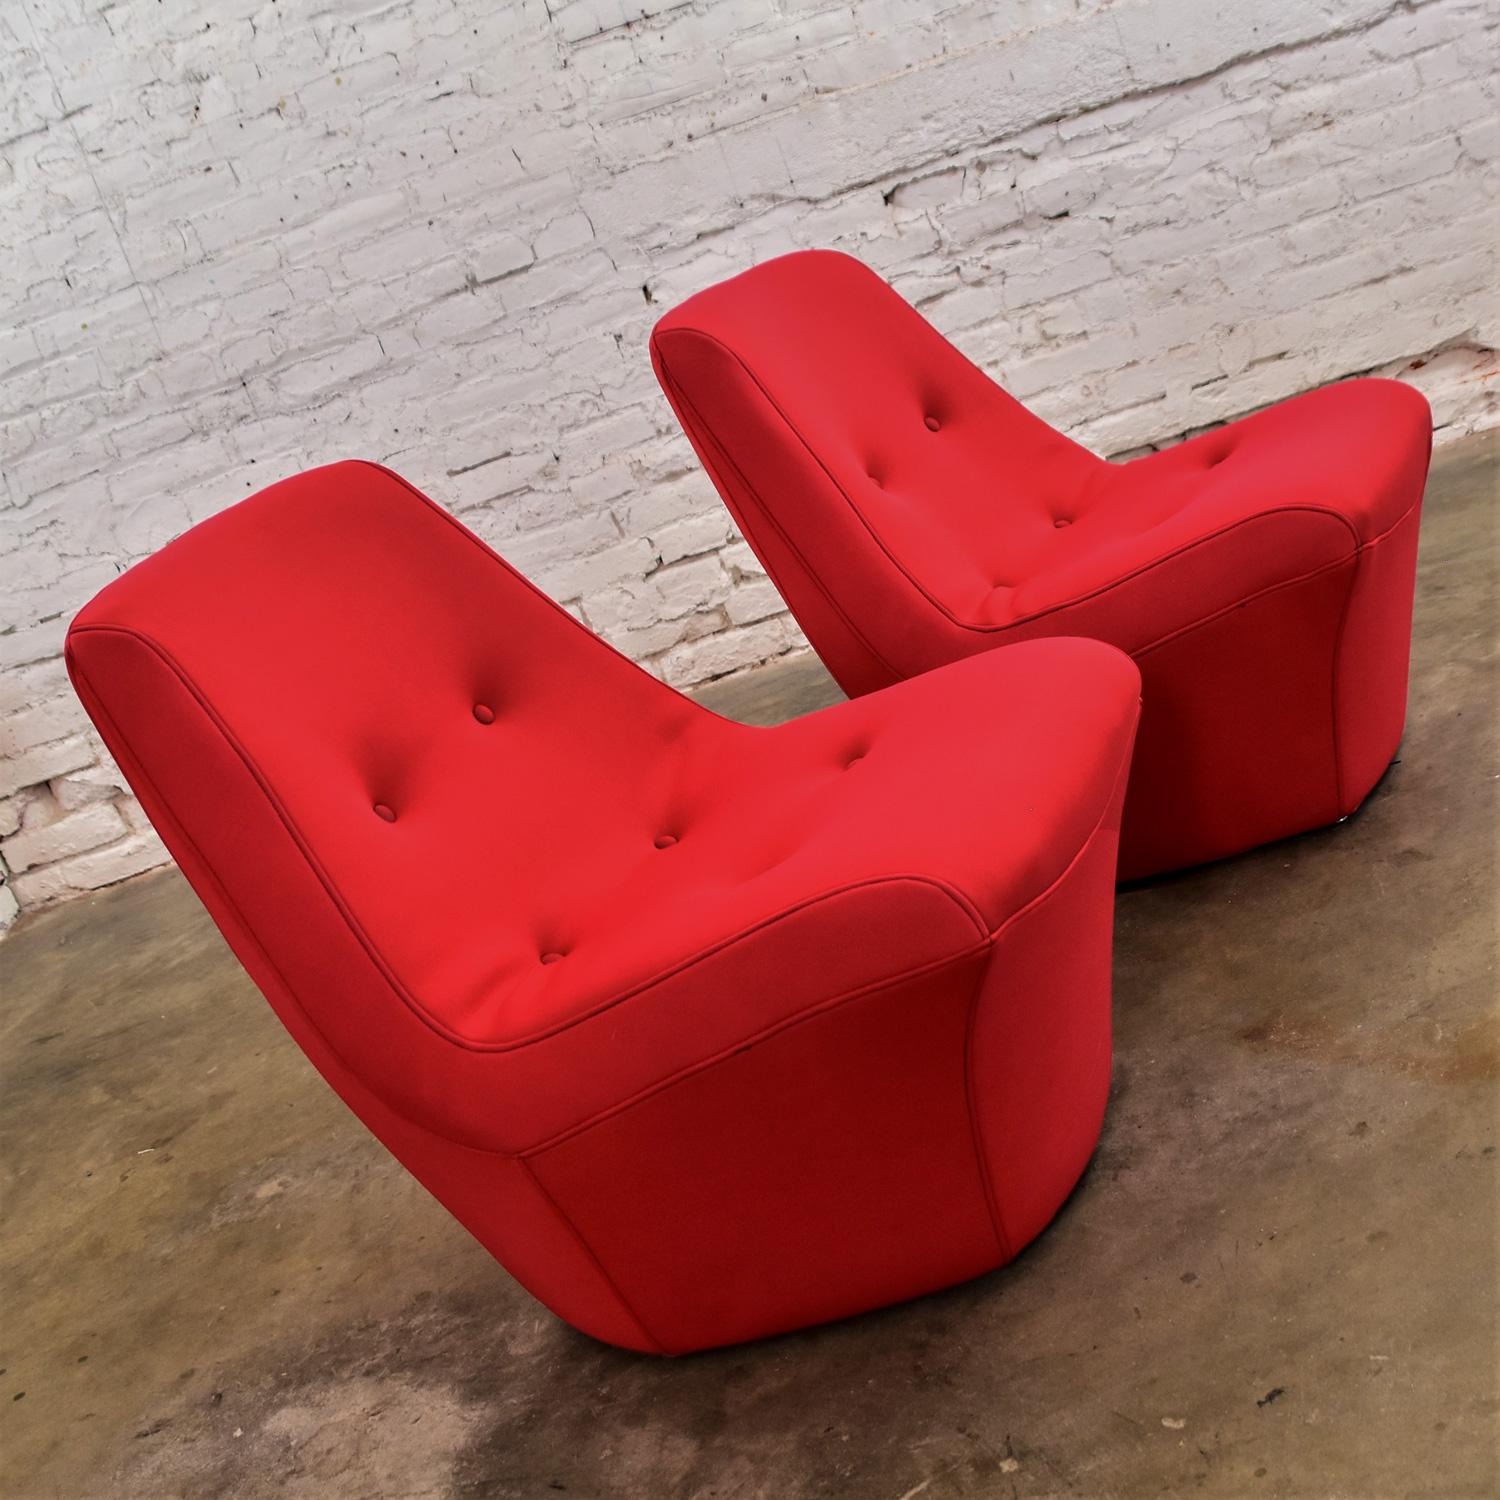 Gorgeous Mod Style Mid-Century Modern red neoprene fabric slipper chairs with button detail by Founders Furniture. Beautiful condition, keeping in mind that these are vintage and not new so will have signs of use and wear. This piece has been